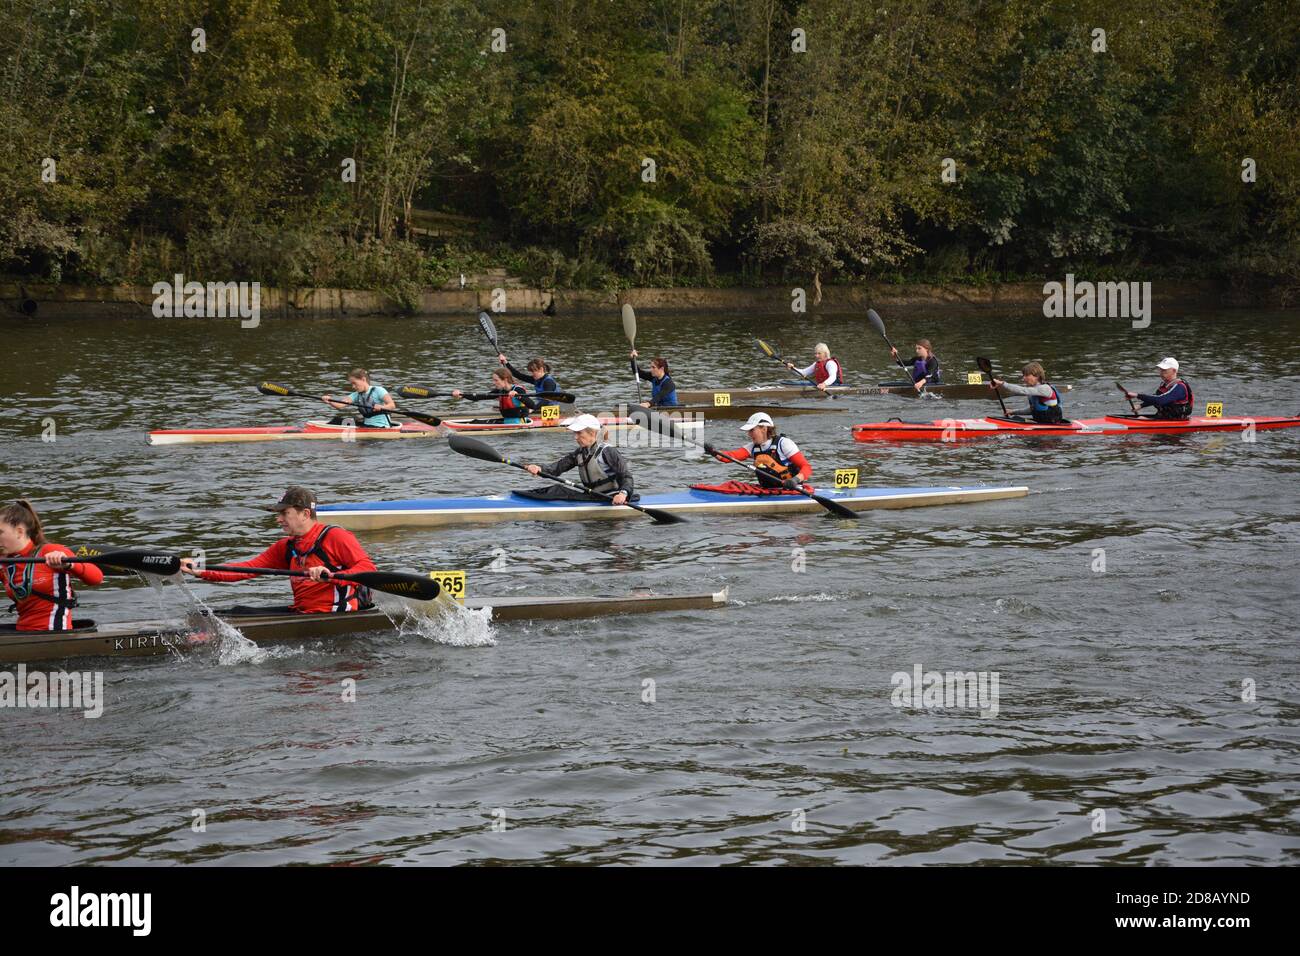 RICHMOND, UNITED KINGDOM - Oct 19, 2020: Photos from the Hasler Final Marathon Kayaking Canoeing National Championships in Richmond, UK. Competition r Stock Photo